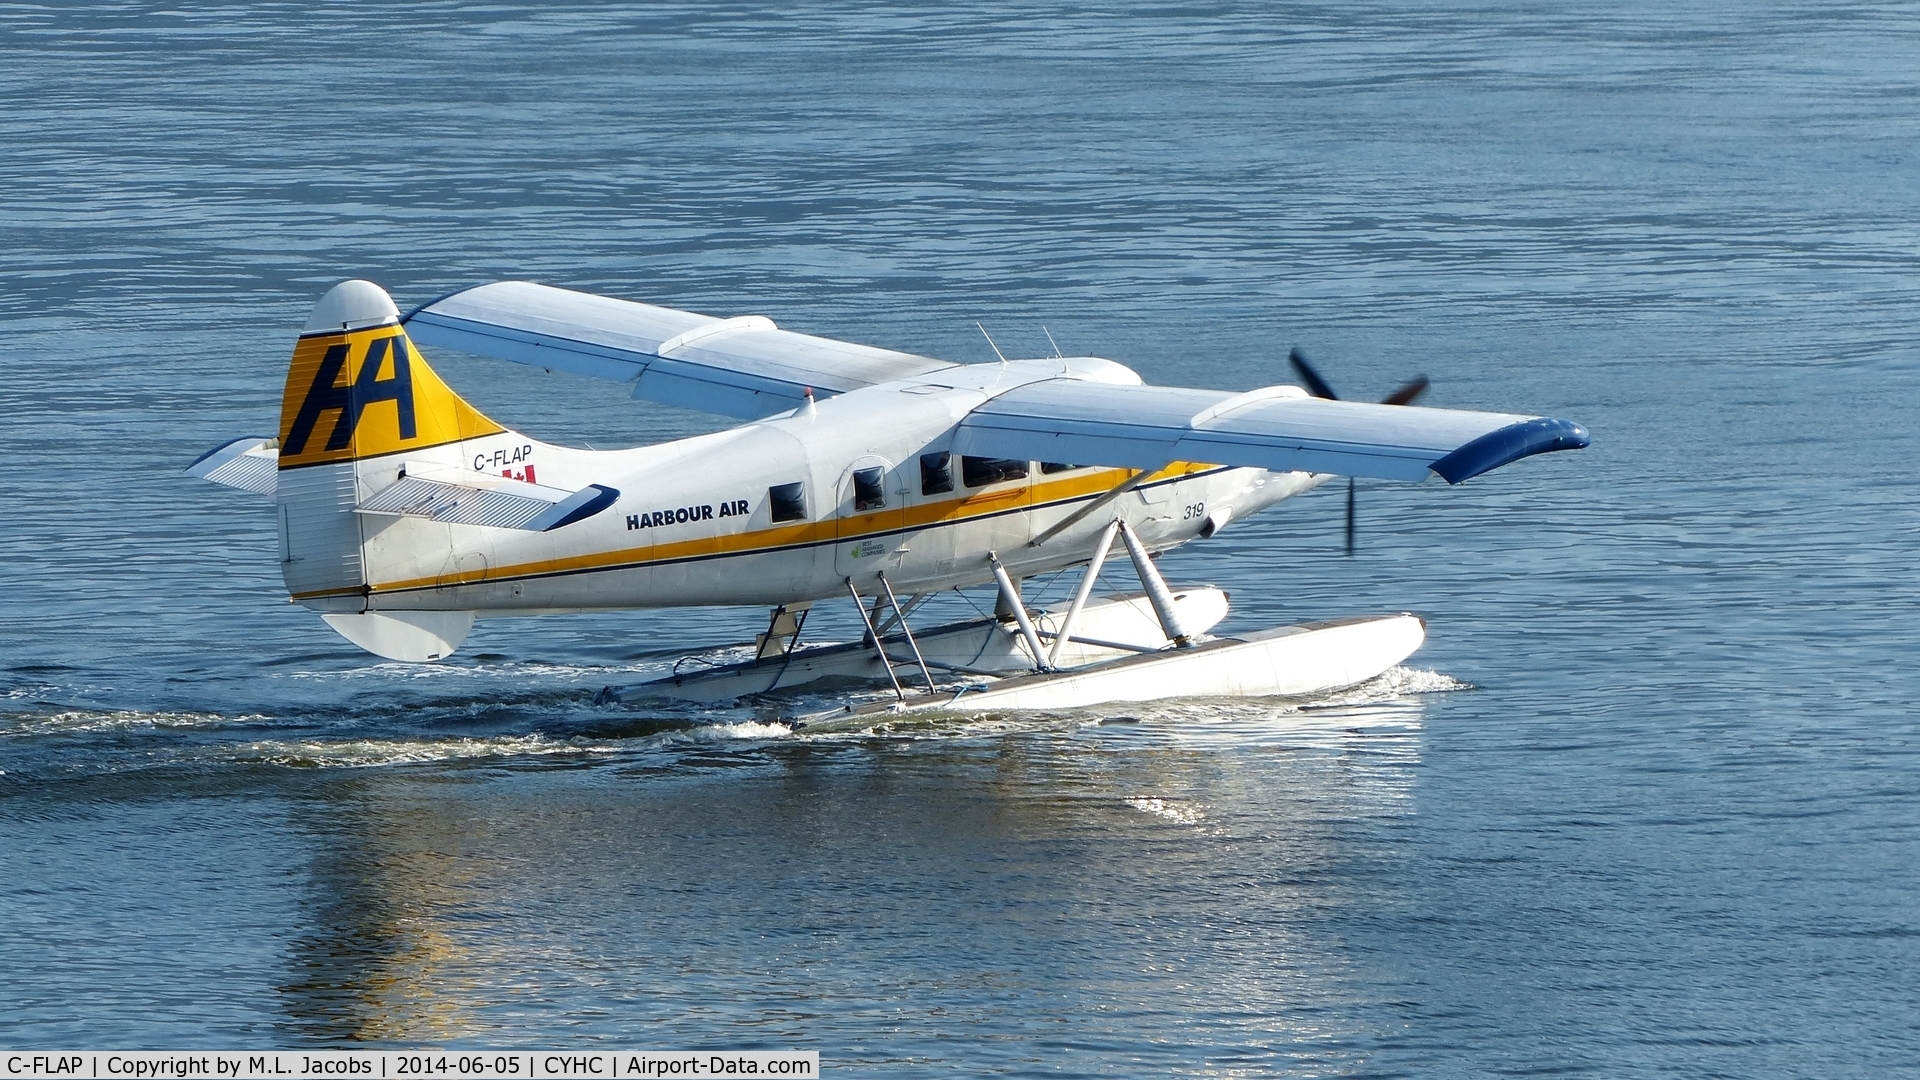 C-FLAP, 1958 De Havilland Canada DHC-3 Otter Otter C/N 289, Harbour Air #319 taxiing for takeoff in Coal Harbour.